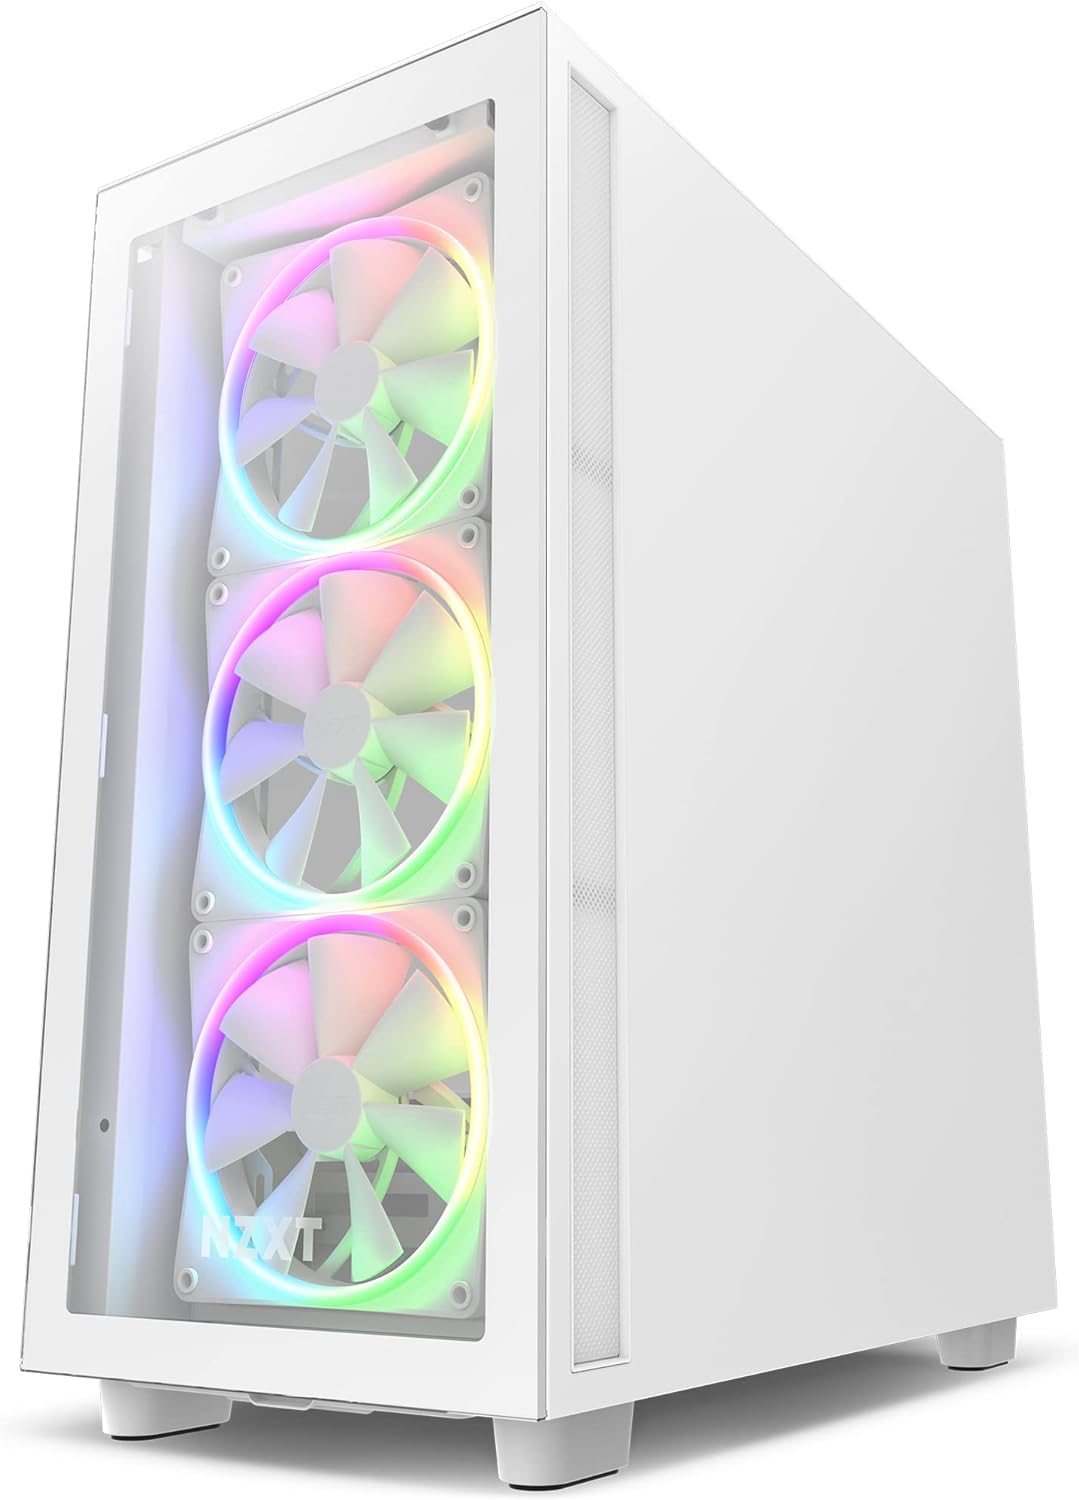 NZXT H7 Elite ATX Tempered Glass Mid Tower Gaming Case